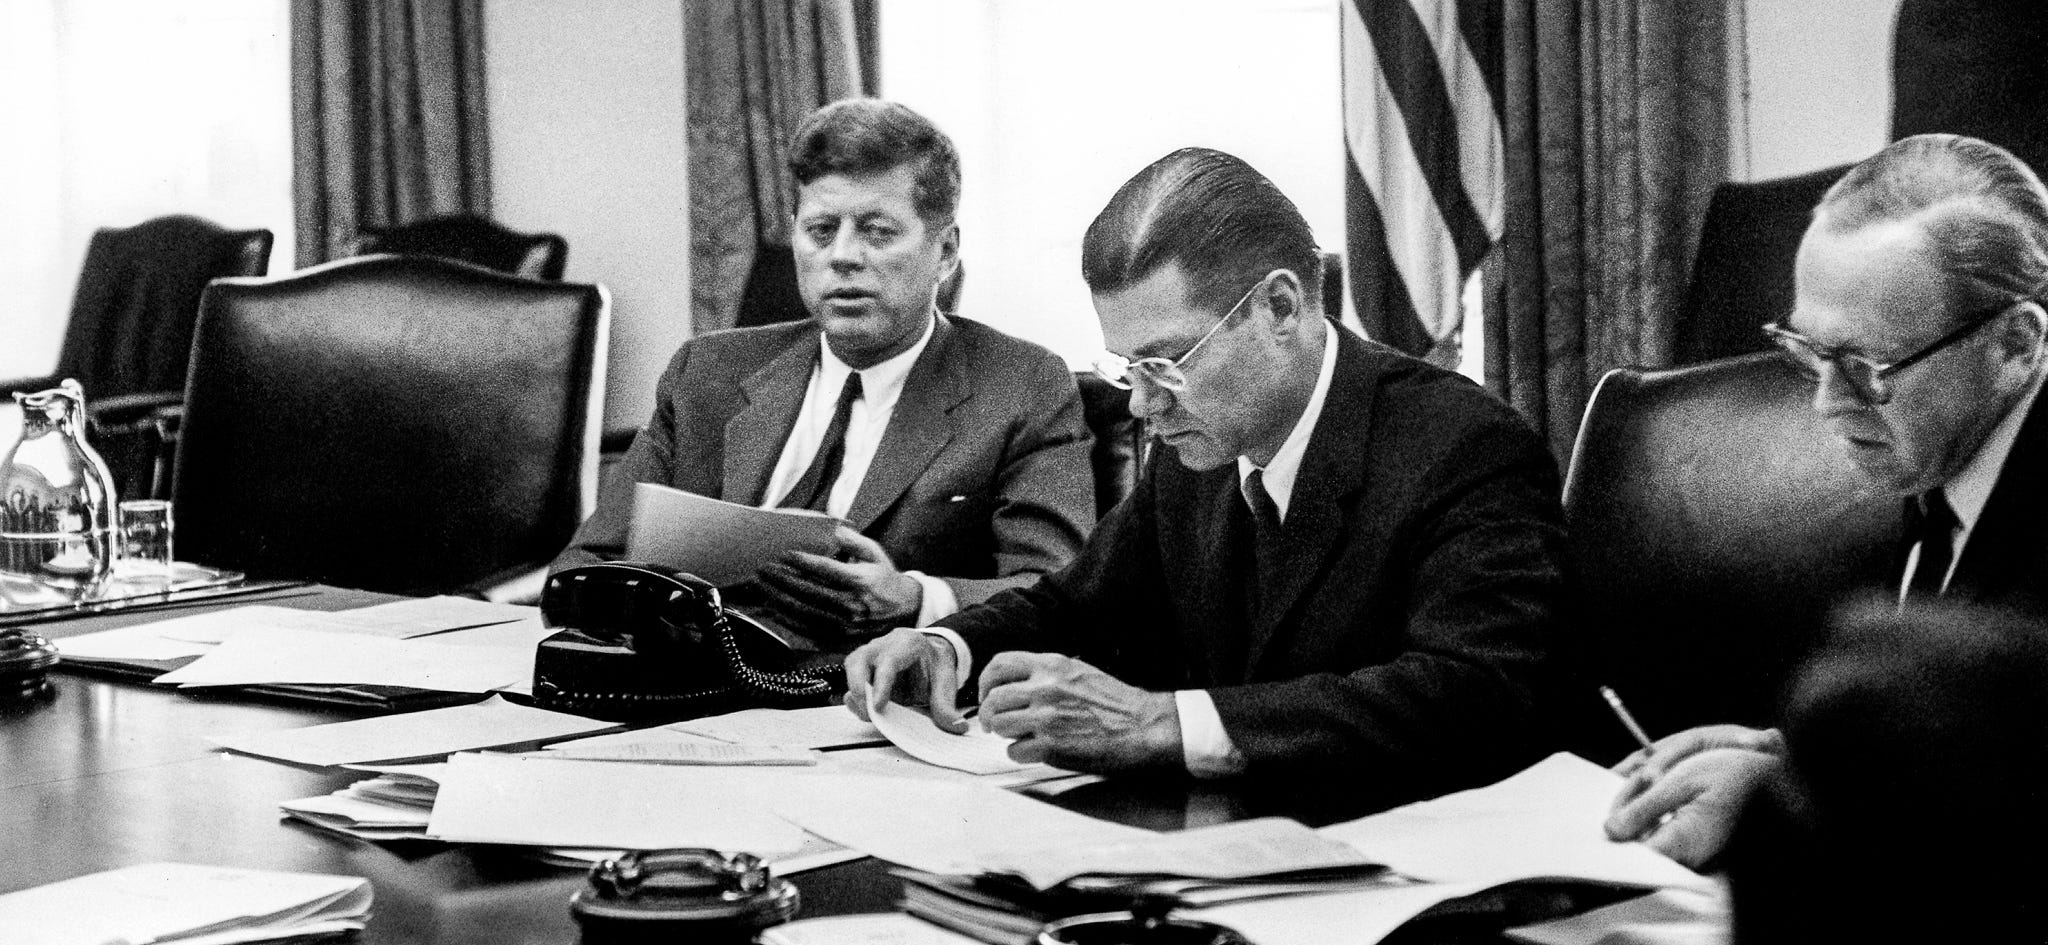 Jfk Tapes Another Summit With Khrushchev And The Politics Of The